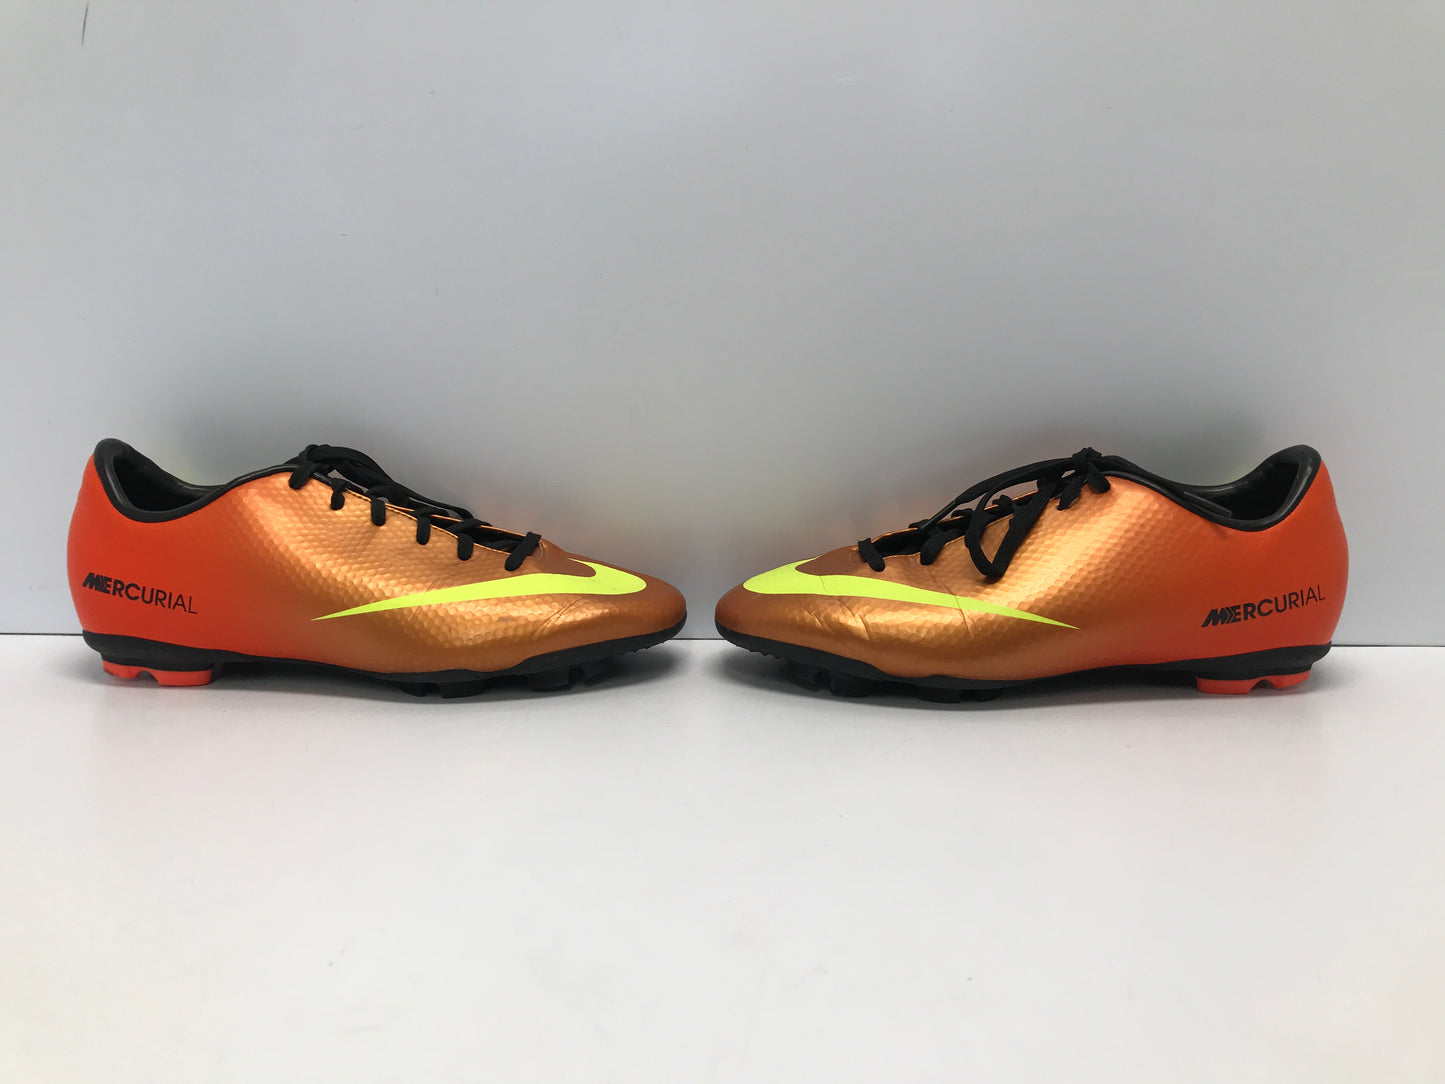 Soccer Shoes Cleats Child Size 5.5 Nike Mercurial Gold Lime Black Excellent